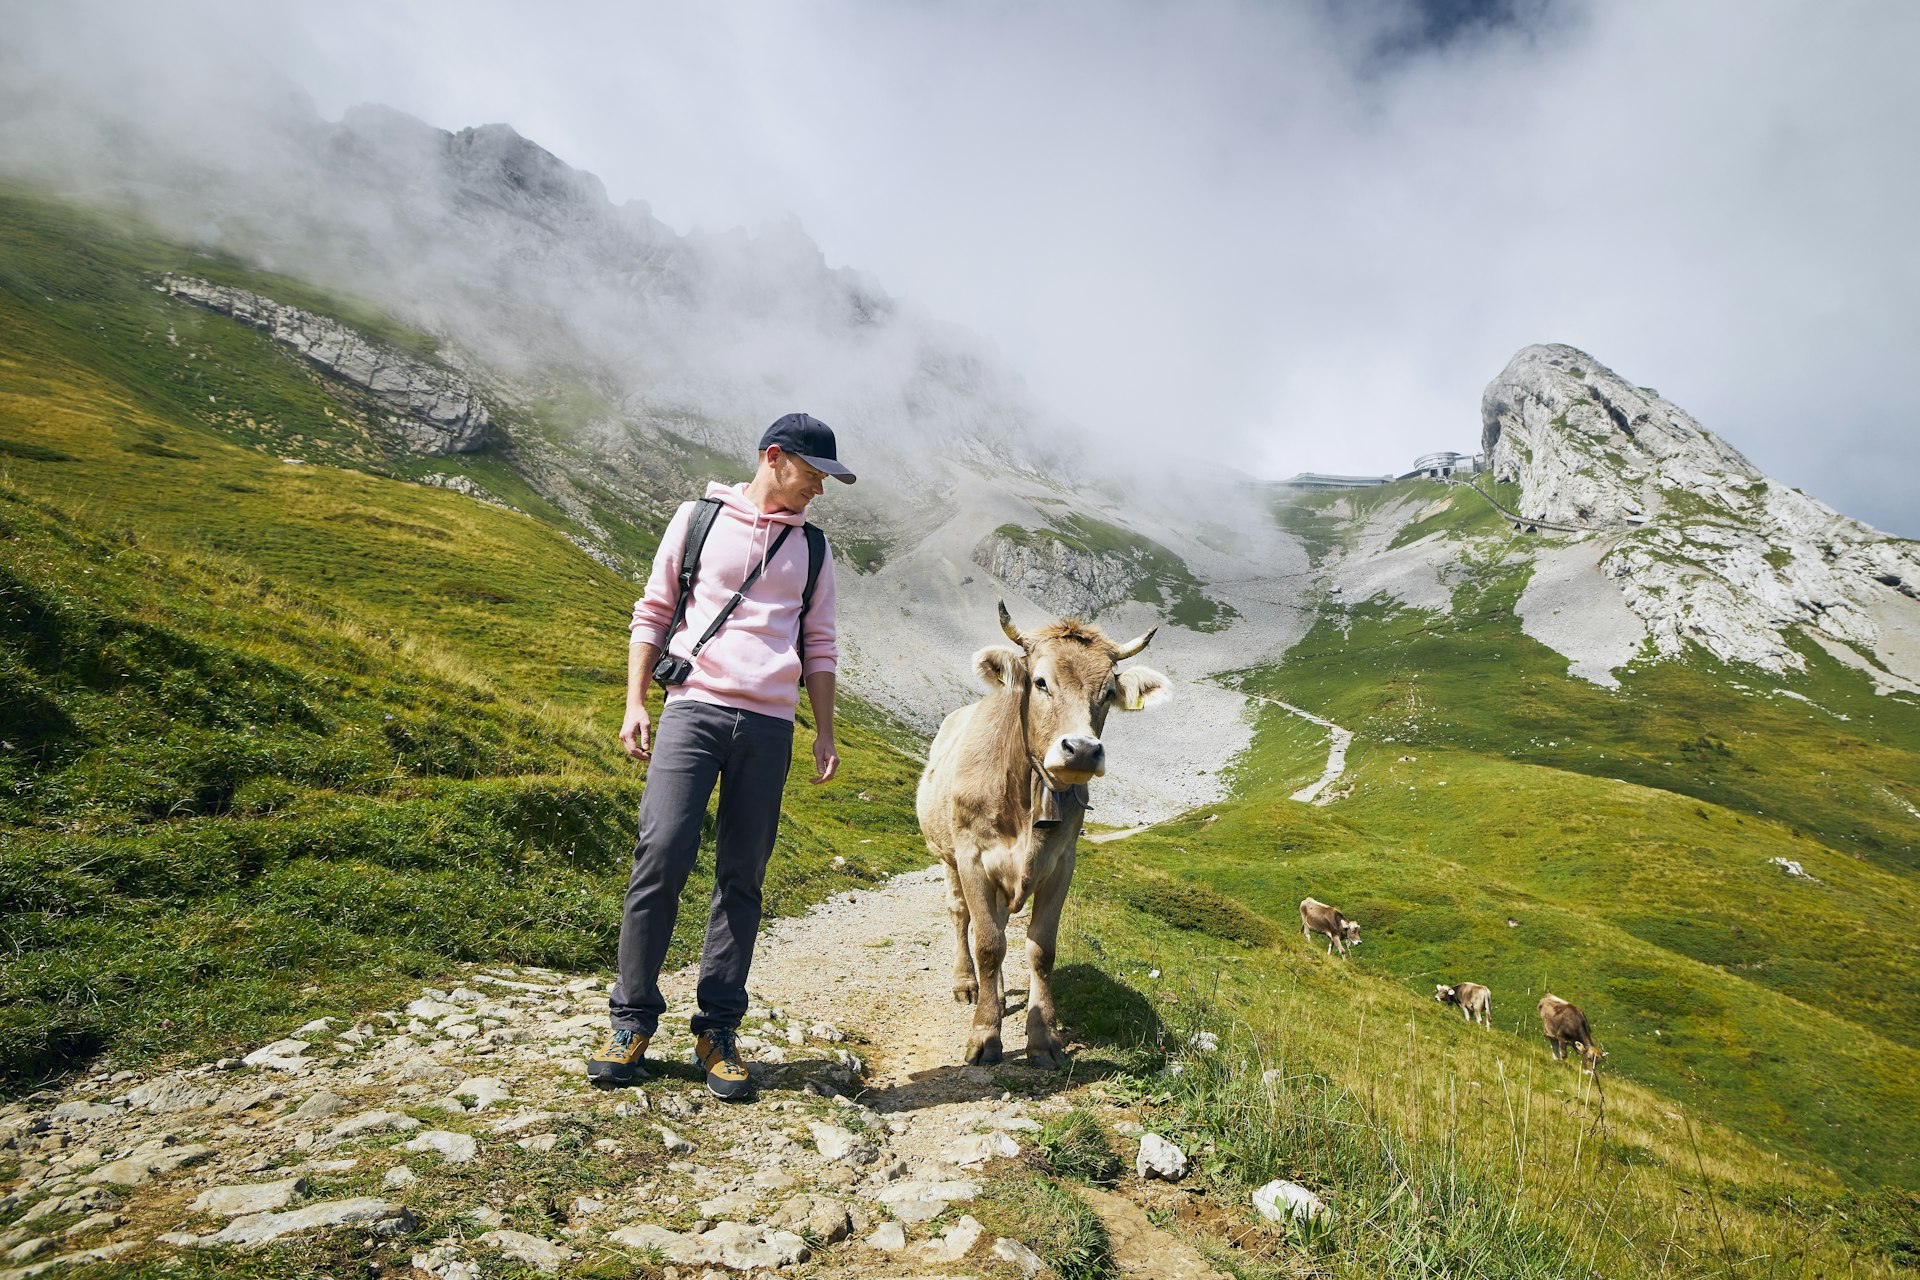 Young man walking with a cow on a mountain footpath, Mt Pilatus, Lucerne, Switzerland